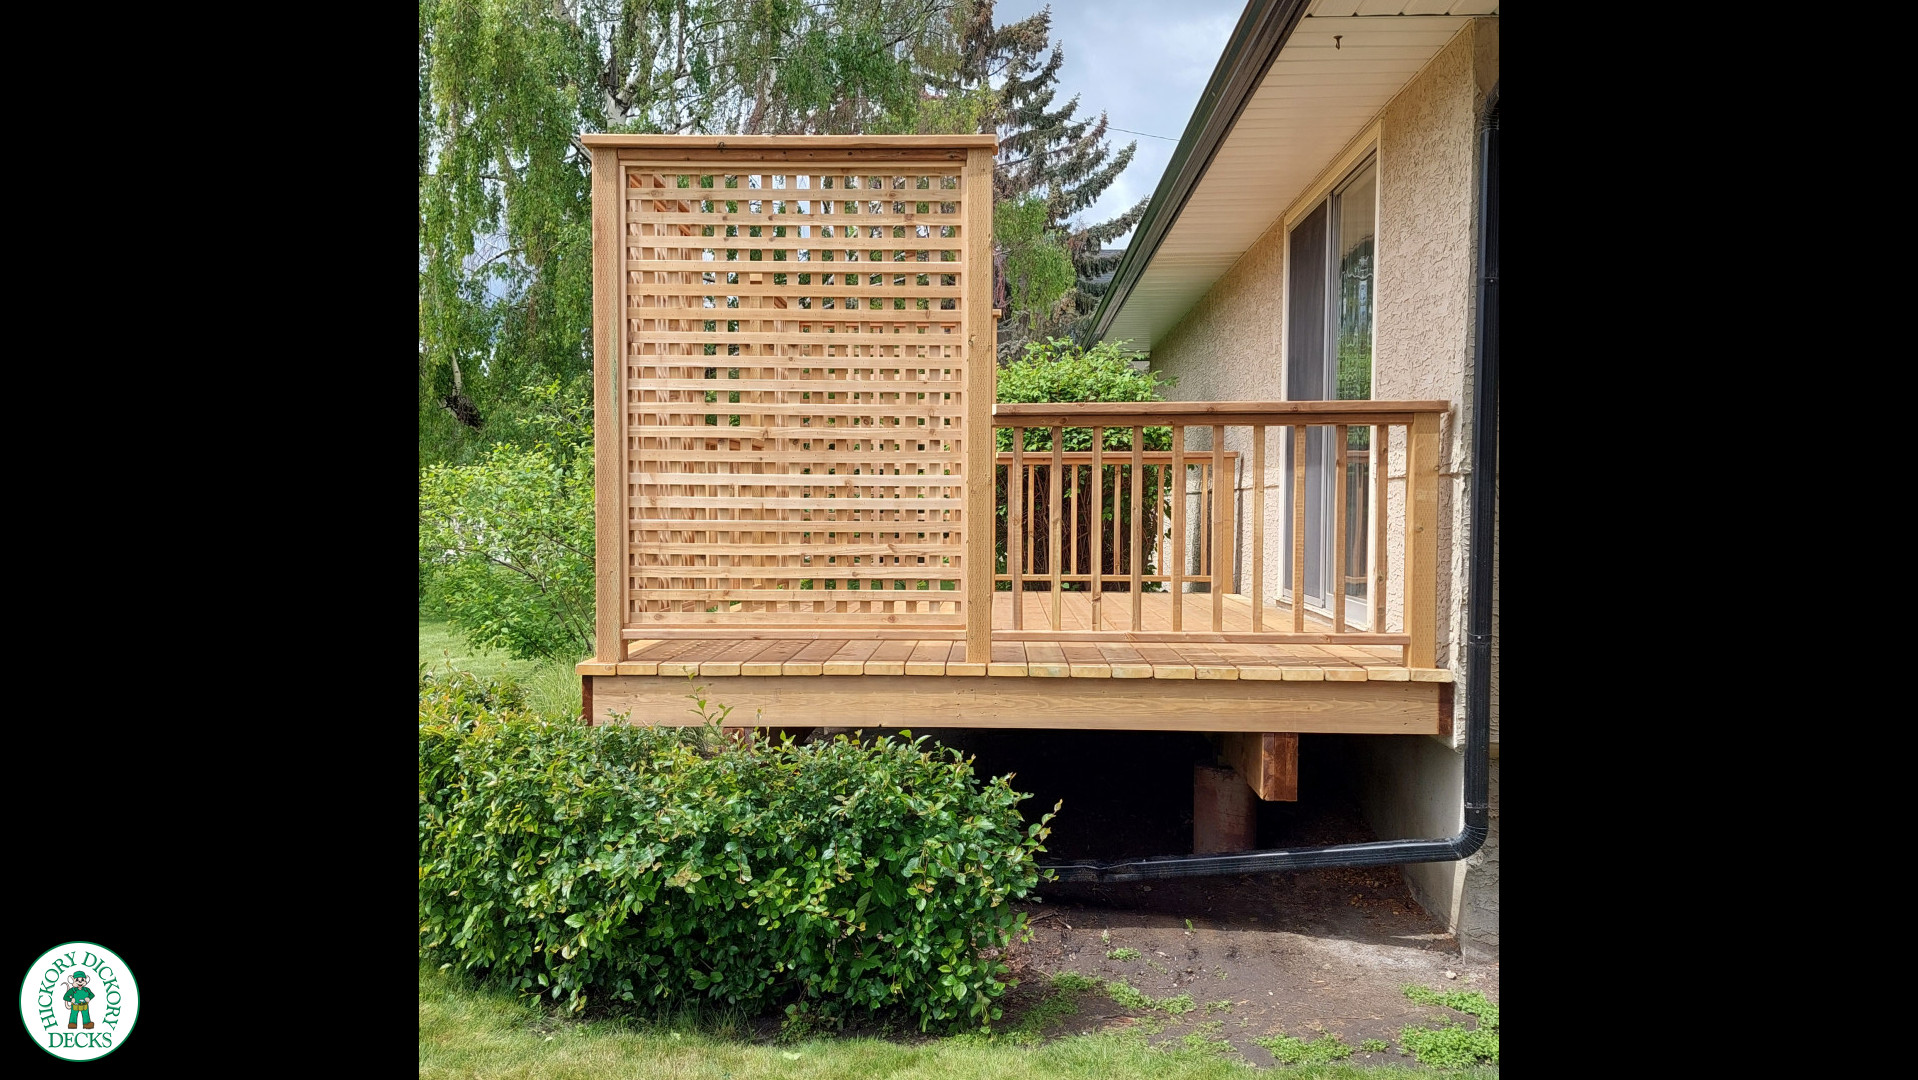 Small pressure treated deck with pressure treated privacy screens and railing.